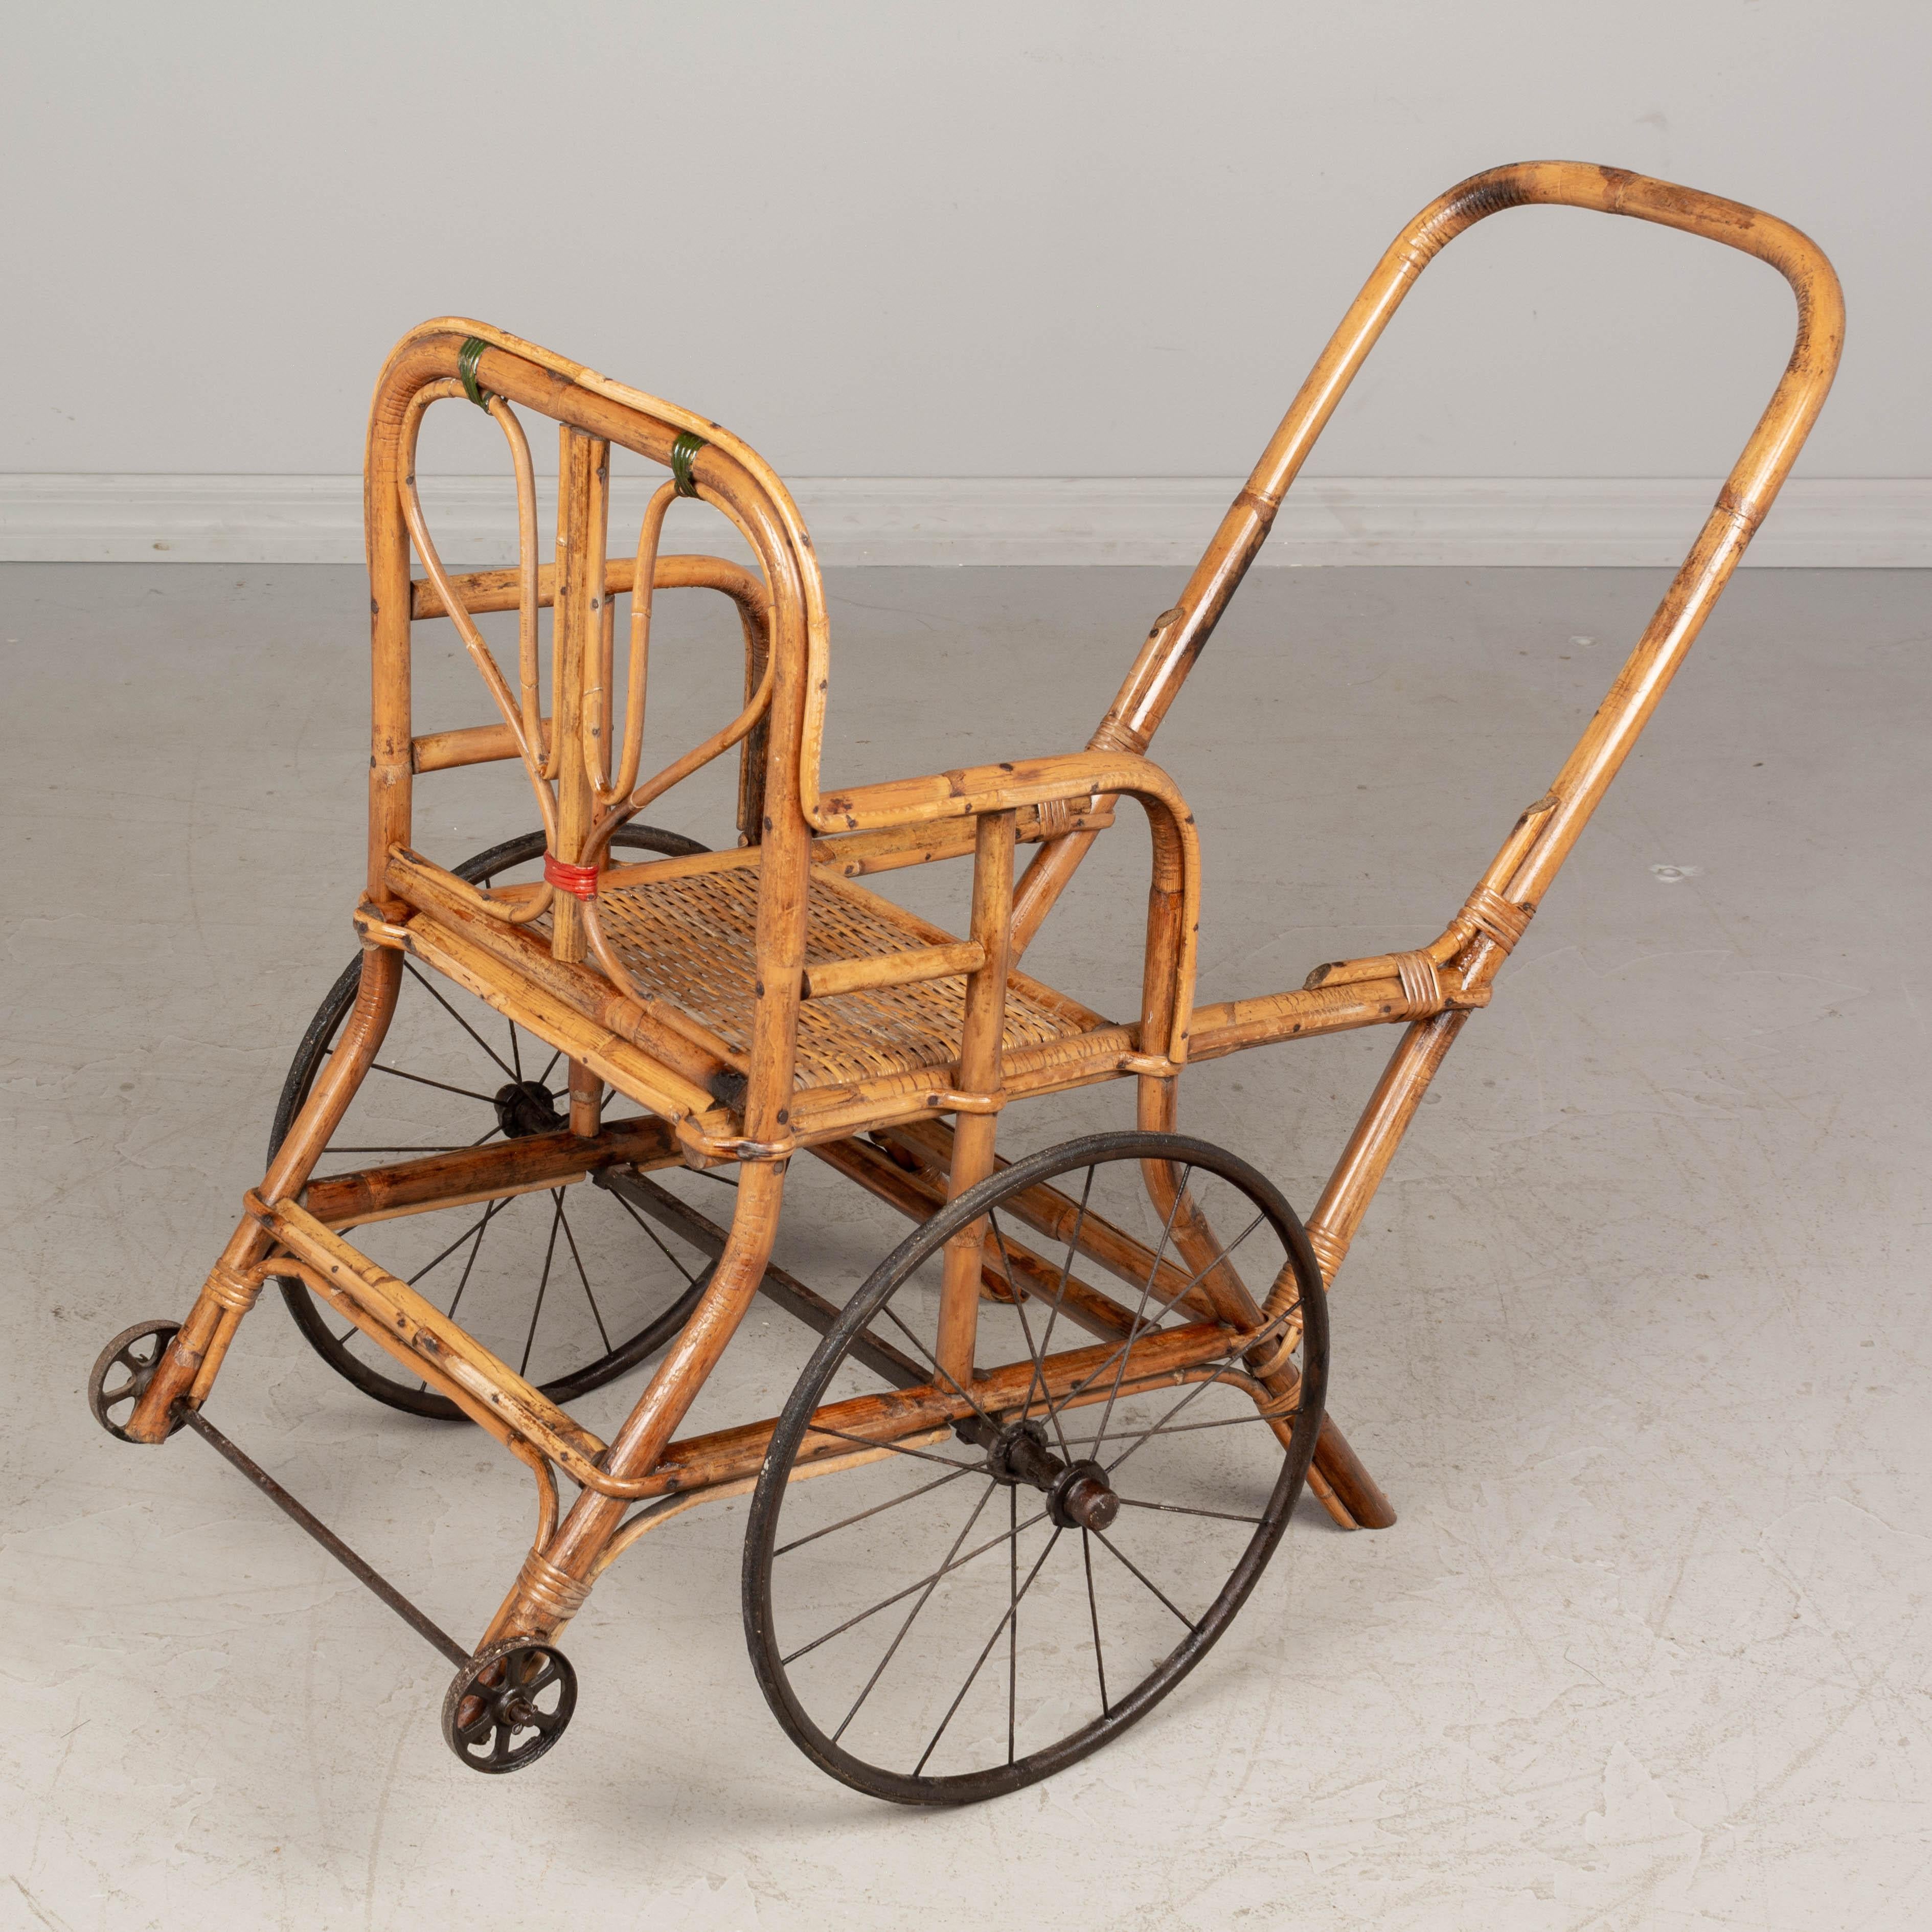 A 19th Century French pousette, or baby stroller with a sturdy bamboo frame and woven rattan seat. Beautifully crafted with touches of green and red binding for decoration. Very good condition for the age, this carriage rolls smoothly. The wheels